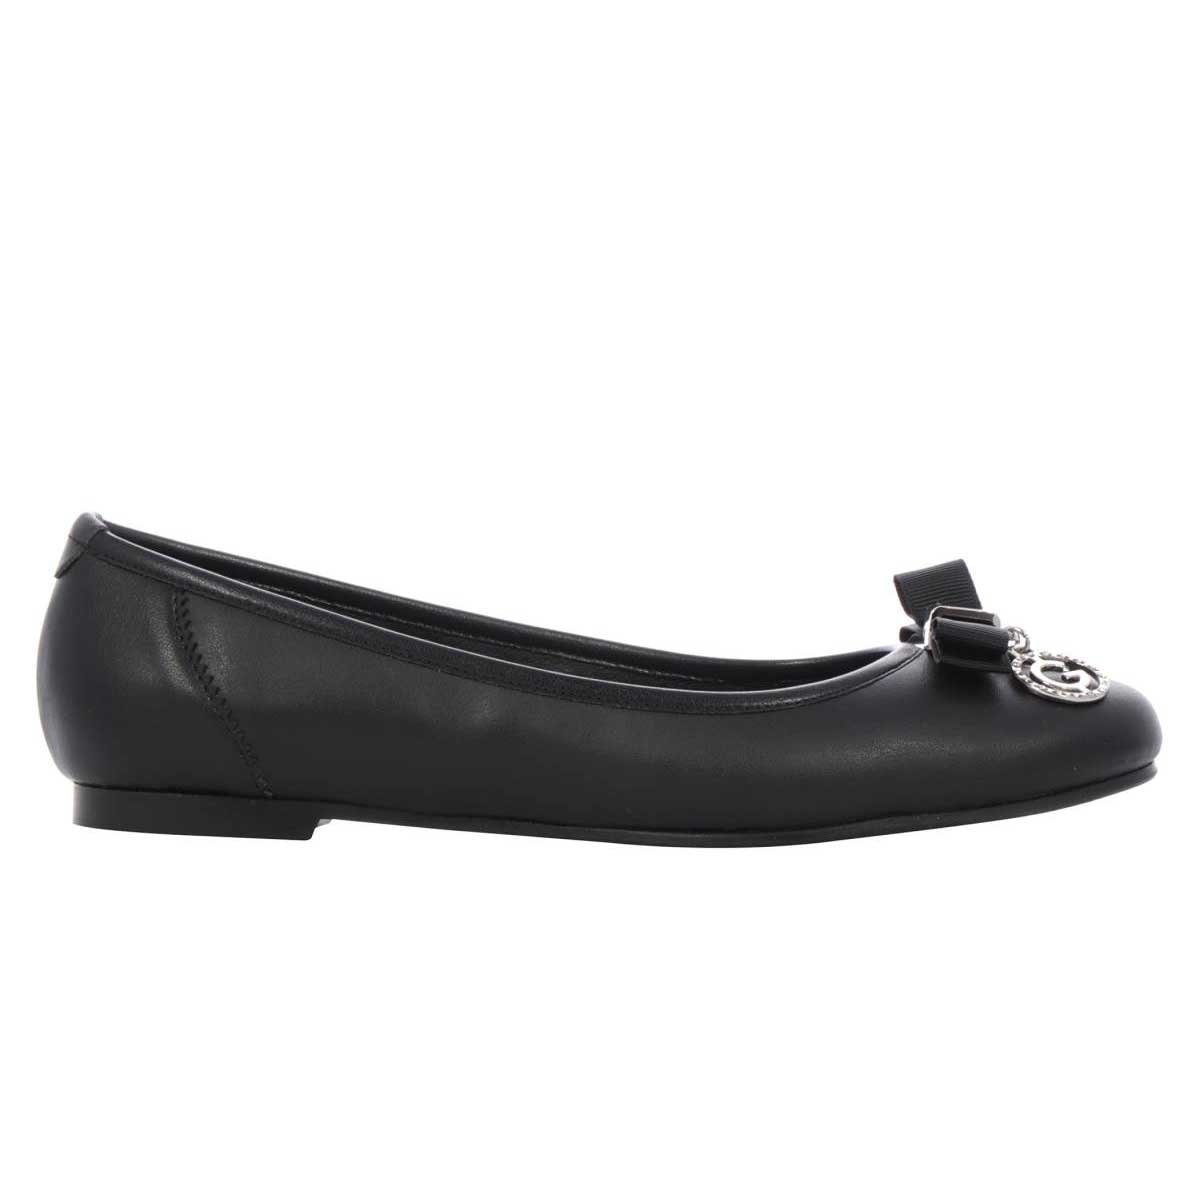 Balerina Flexible Color Negro G By Guess